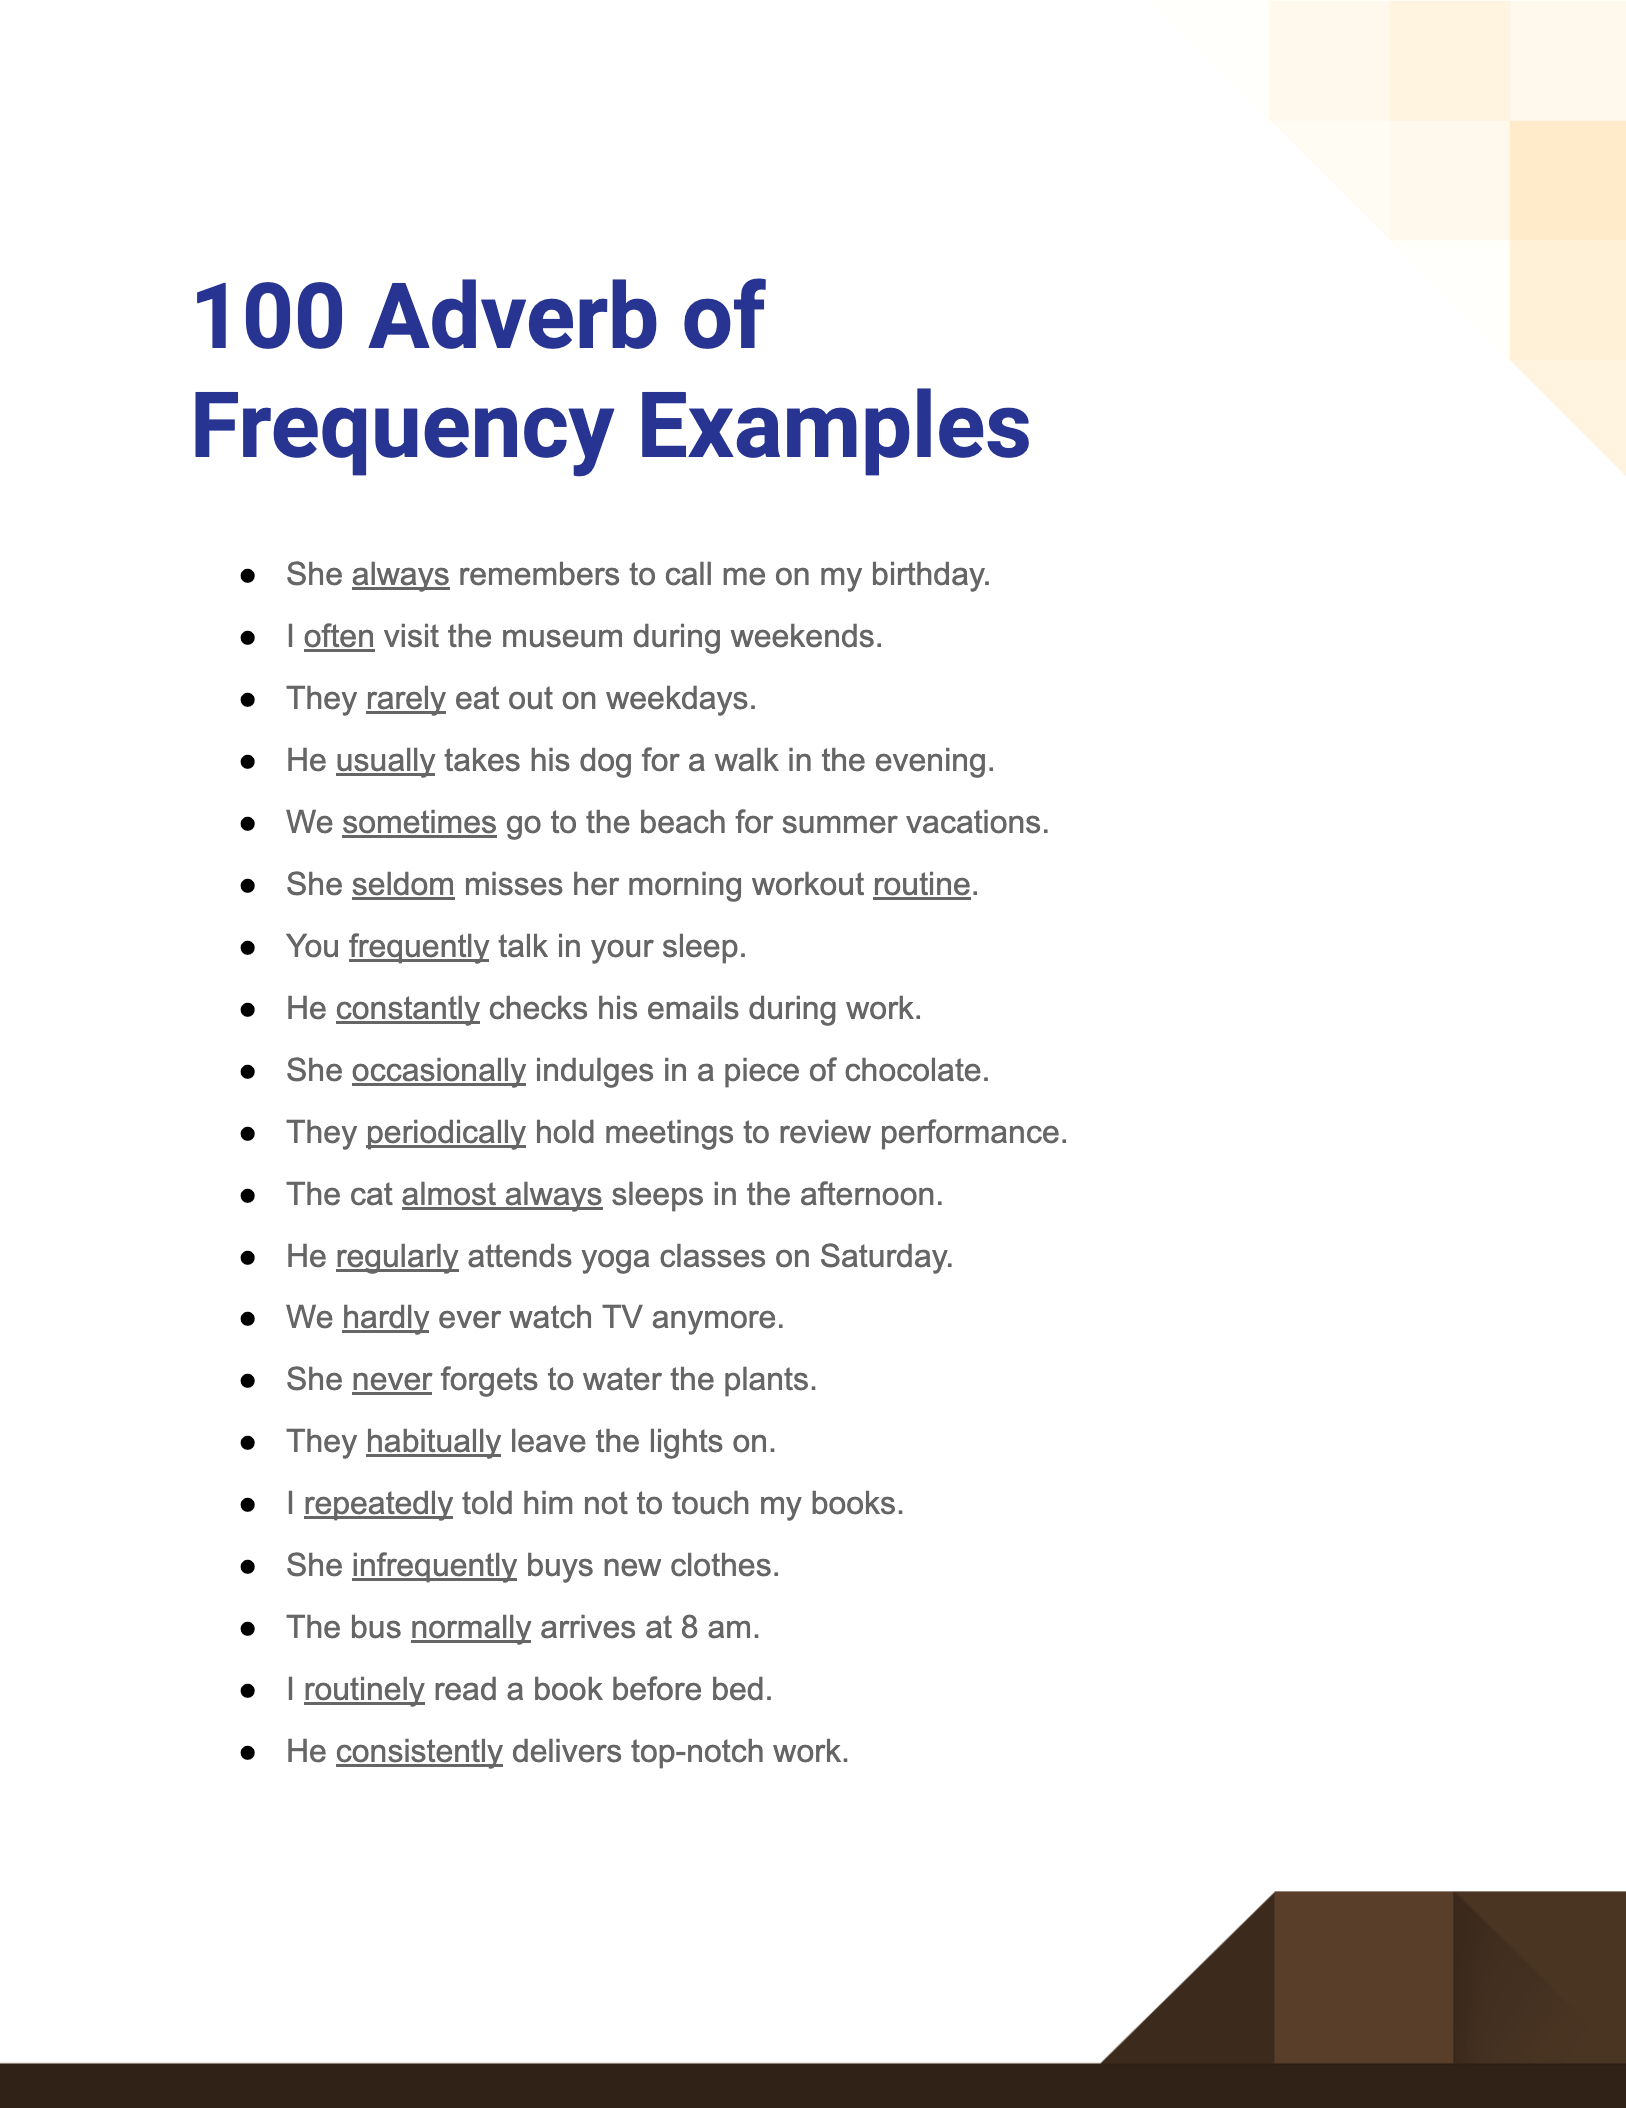 adverb of frequency examples